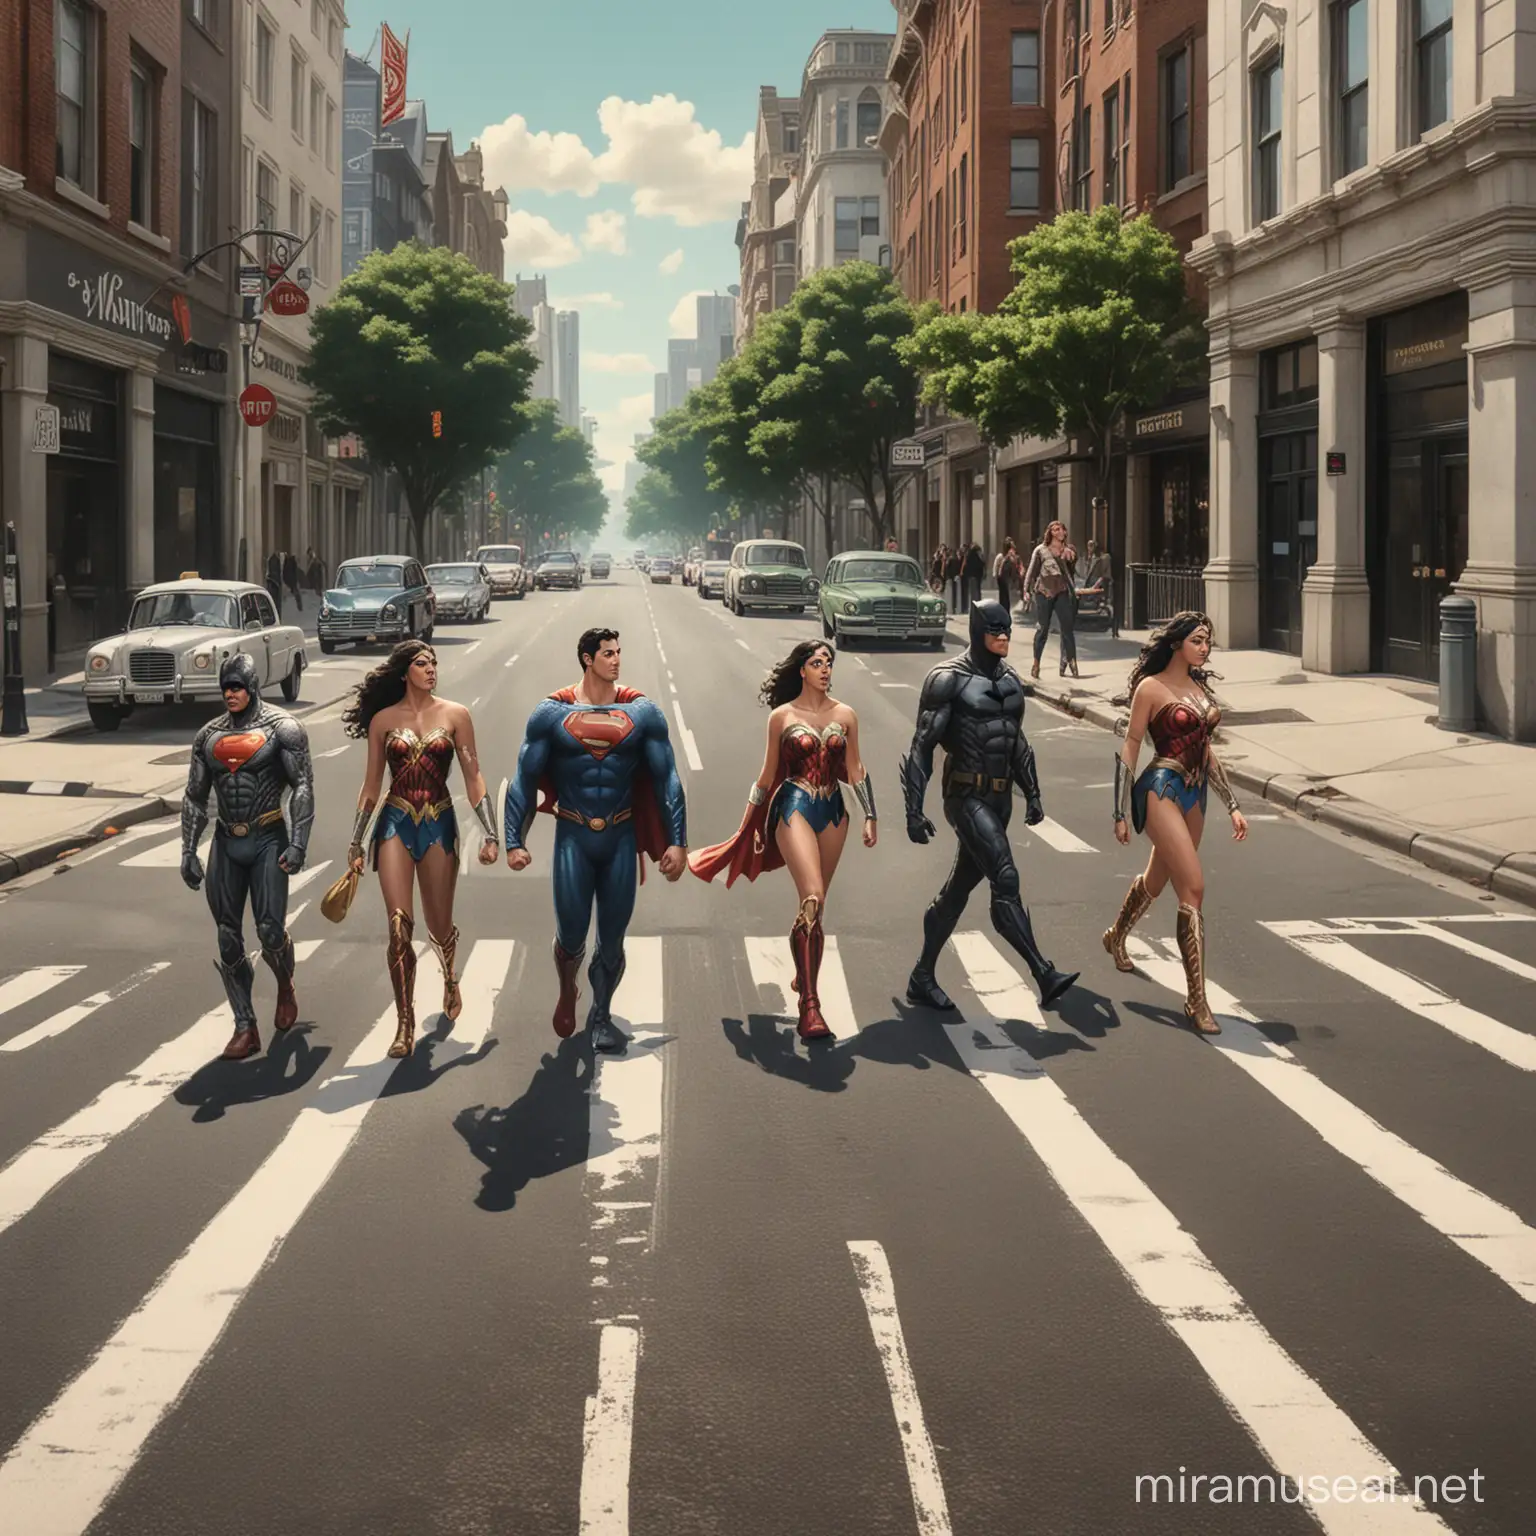 Superman, Batman, Wonder Woman, Aquaman walking across the street from left to right. They are walking single file, one behind the other In the style of The Abbey Road album cover.